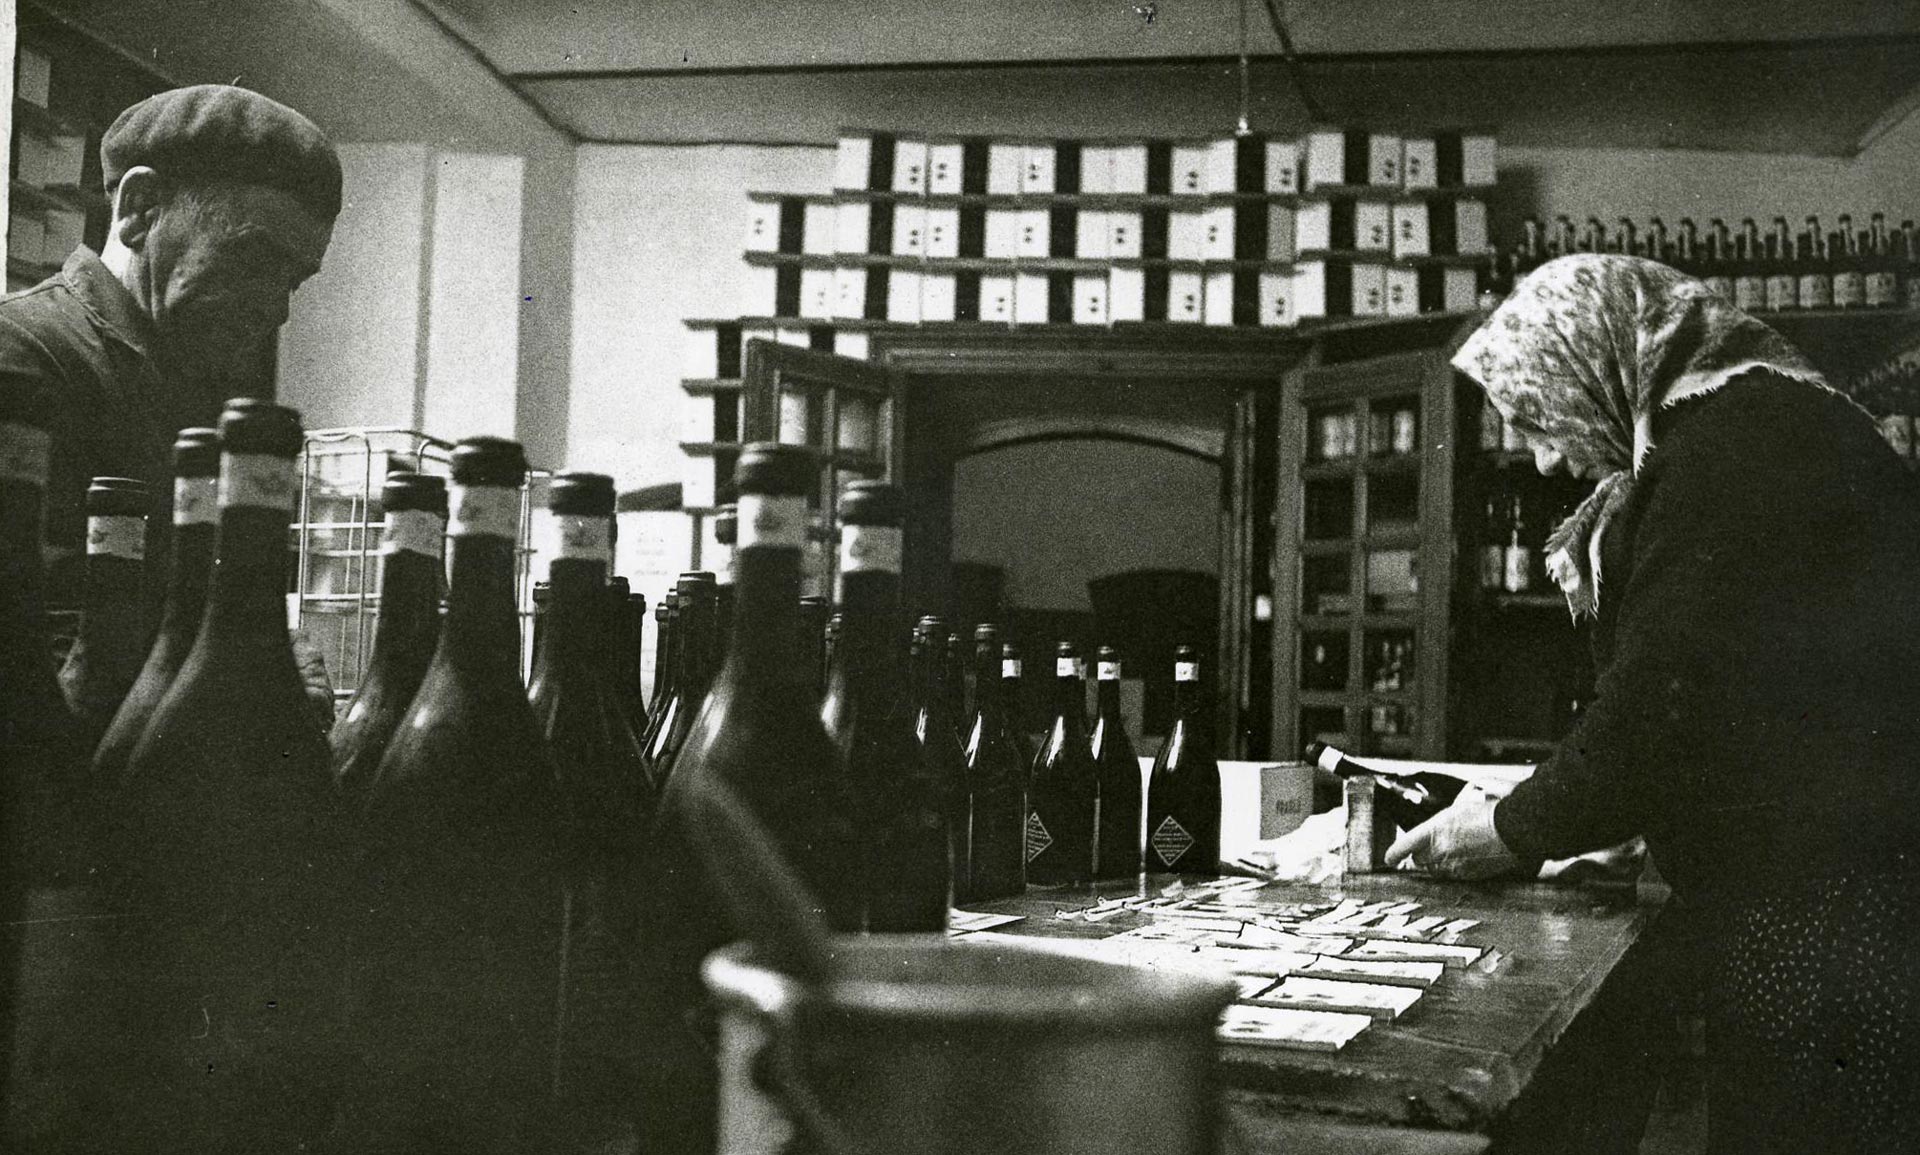 Historical photo depicting the labeling process of wine bottles